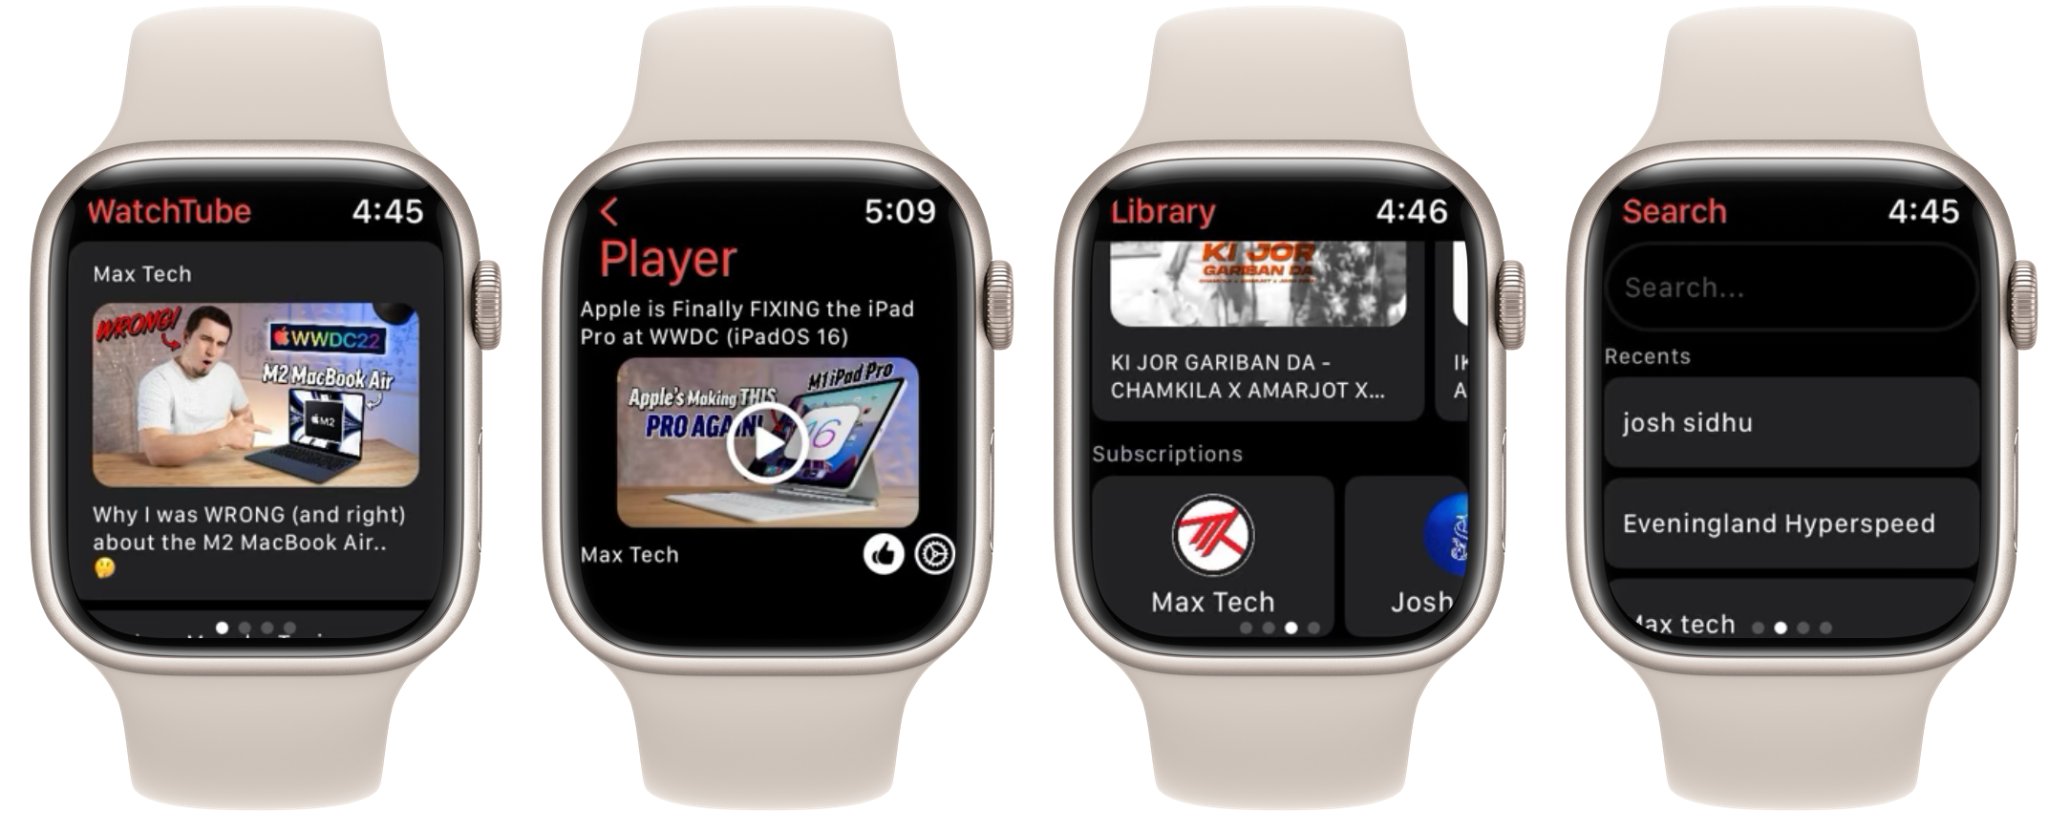 WatchTube Brings Together the Unlikely Combination of YouTube and the Apple Watch